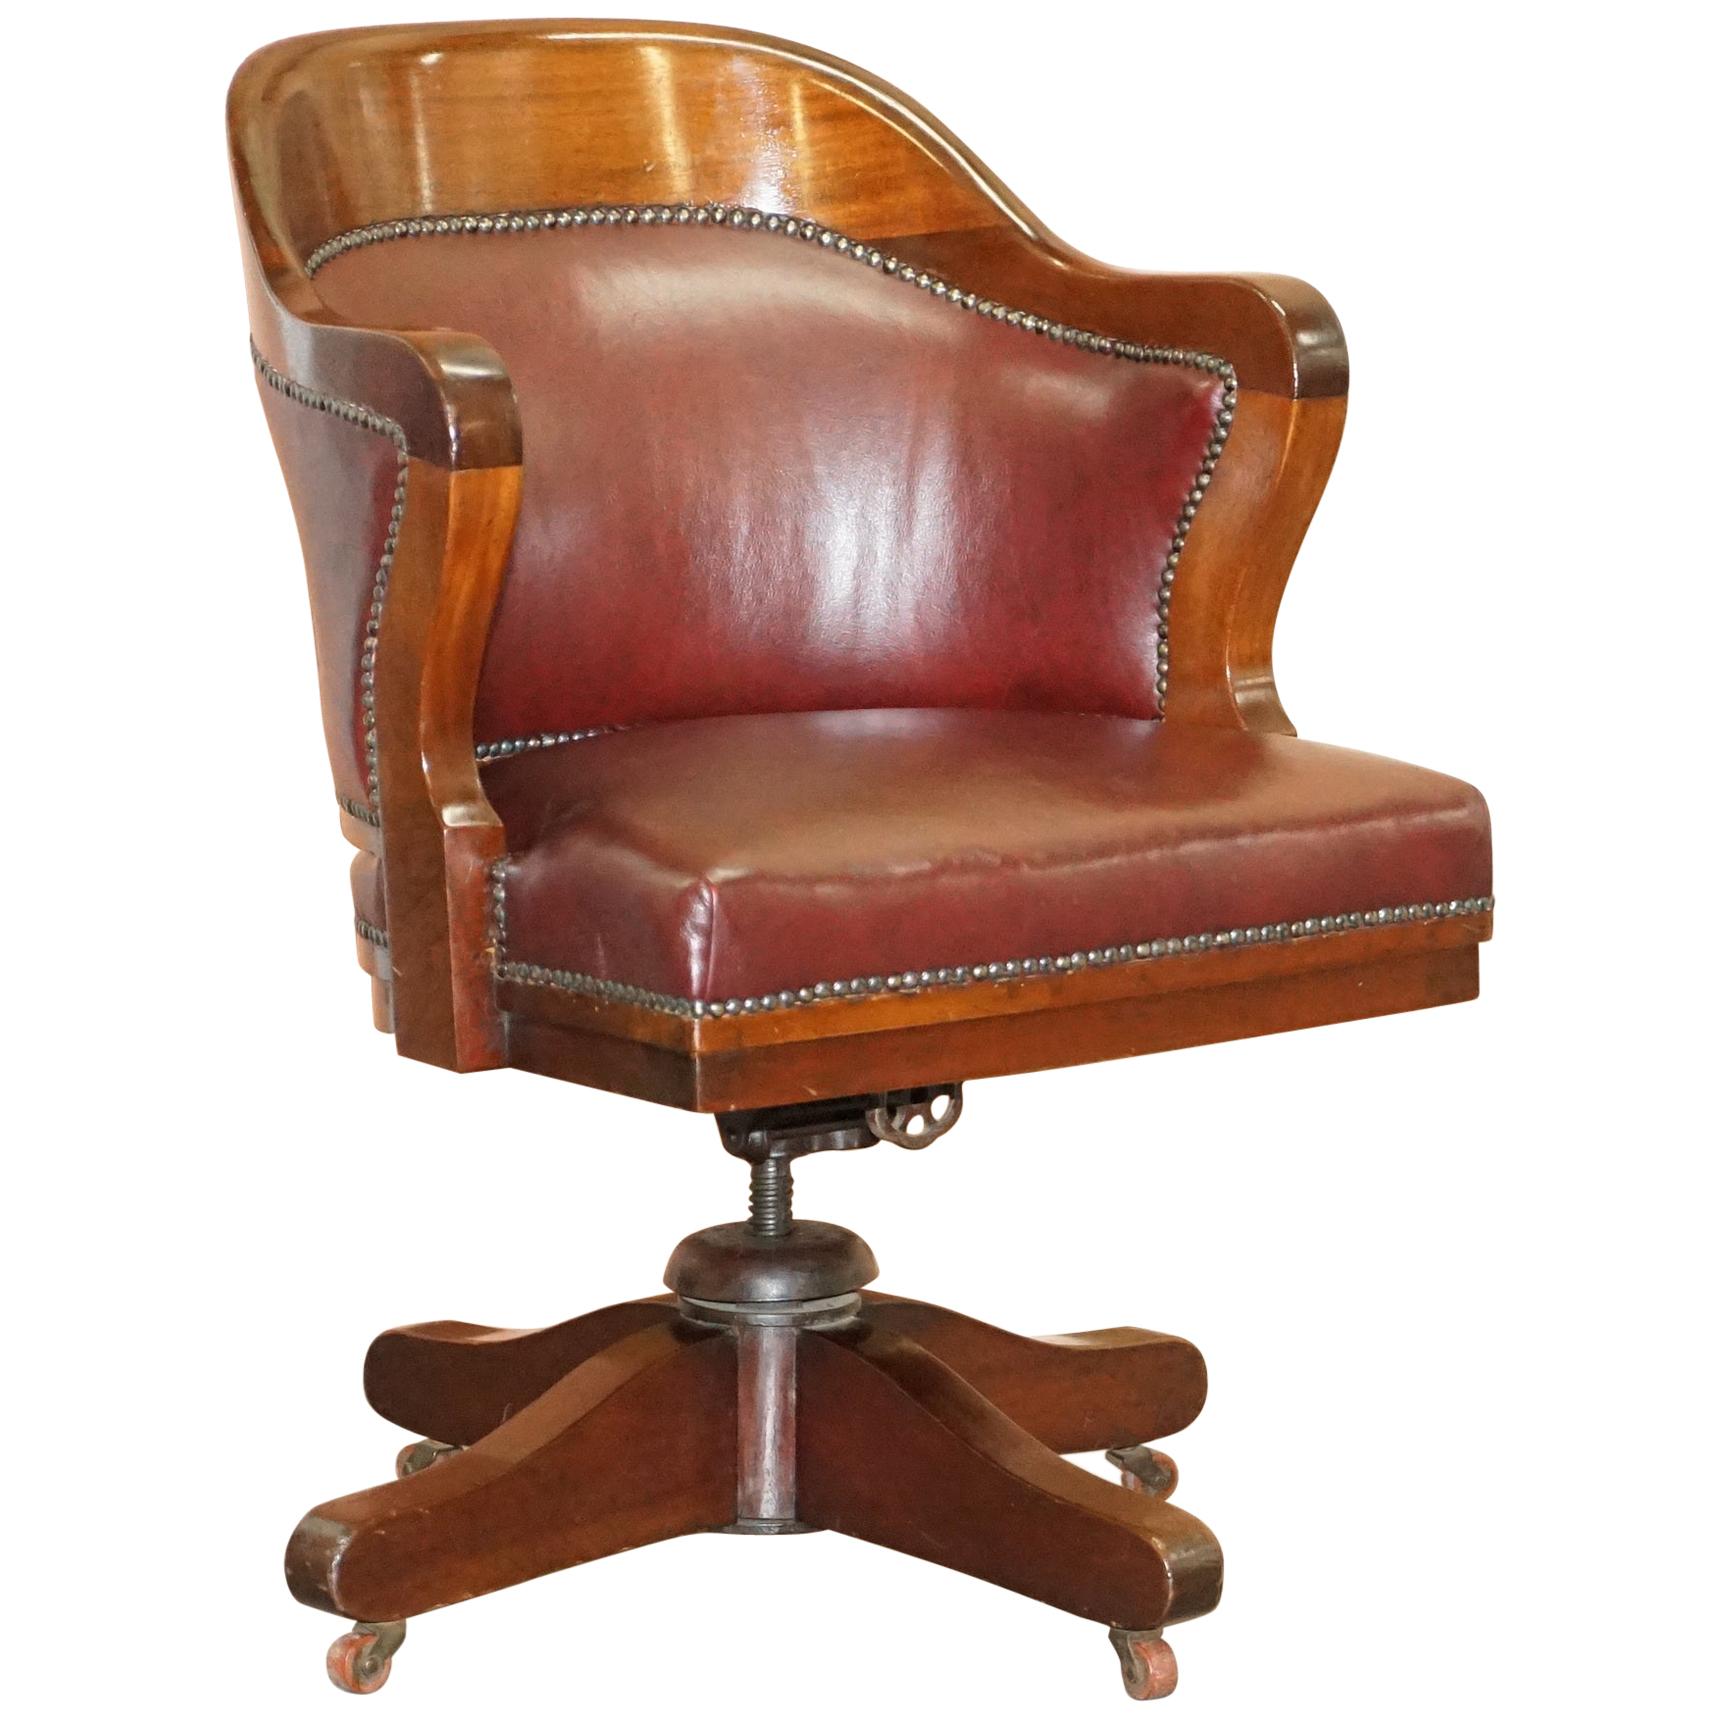 1900 Wylie & Lochhead by Appointment to the King Oxblood Leather Captains Chair